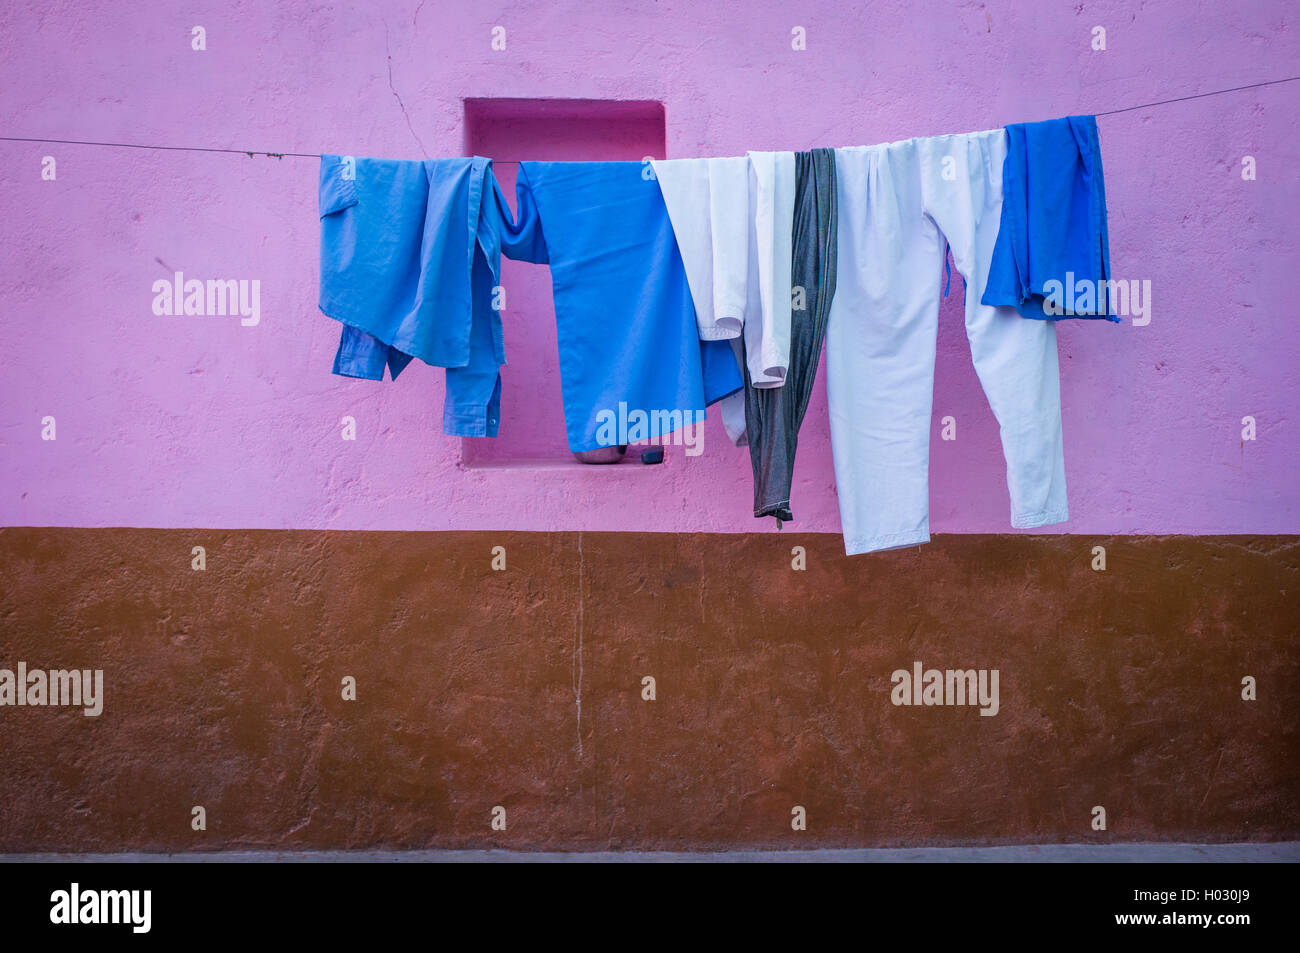 GODWAR REGION, INDIA - 12 FEBRUARY 2015: Clothes hang on wire next to pink and brown wall. Stock Photo